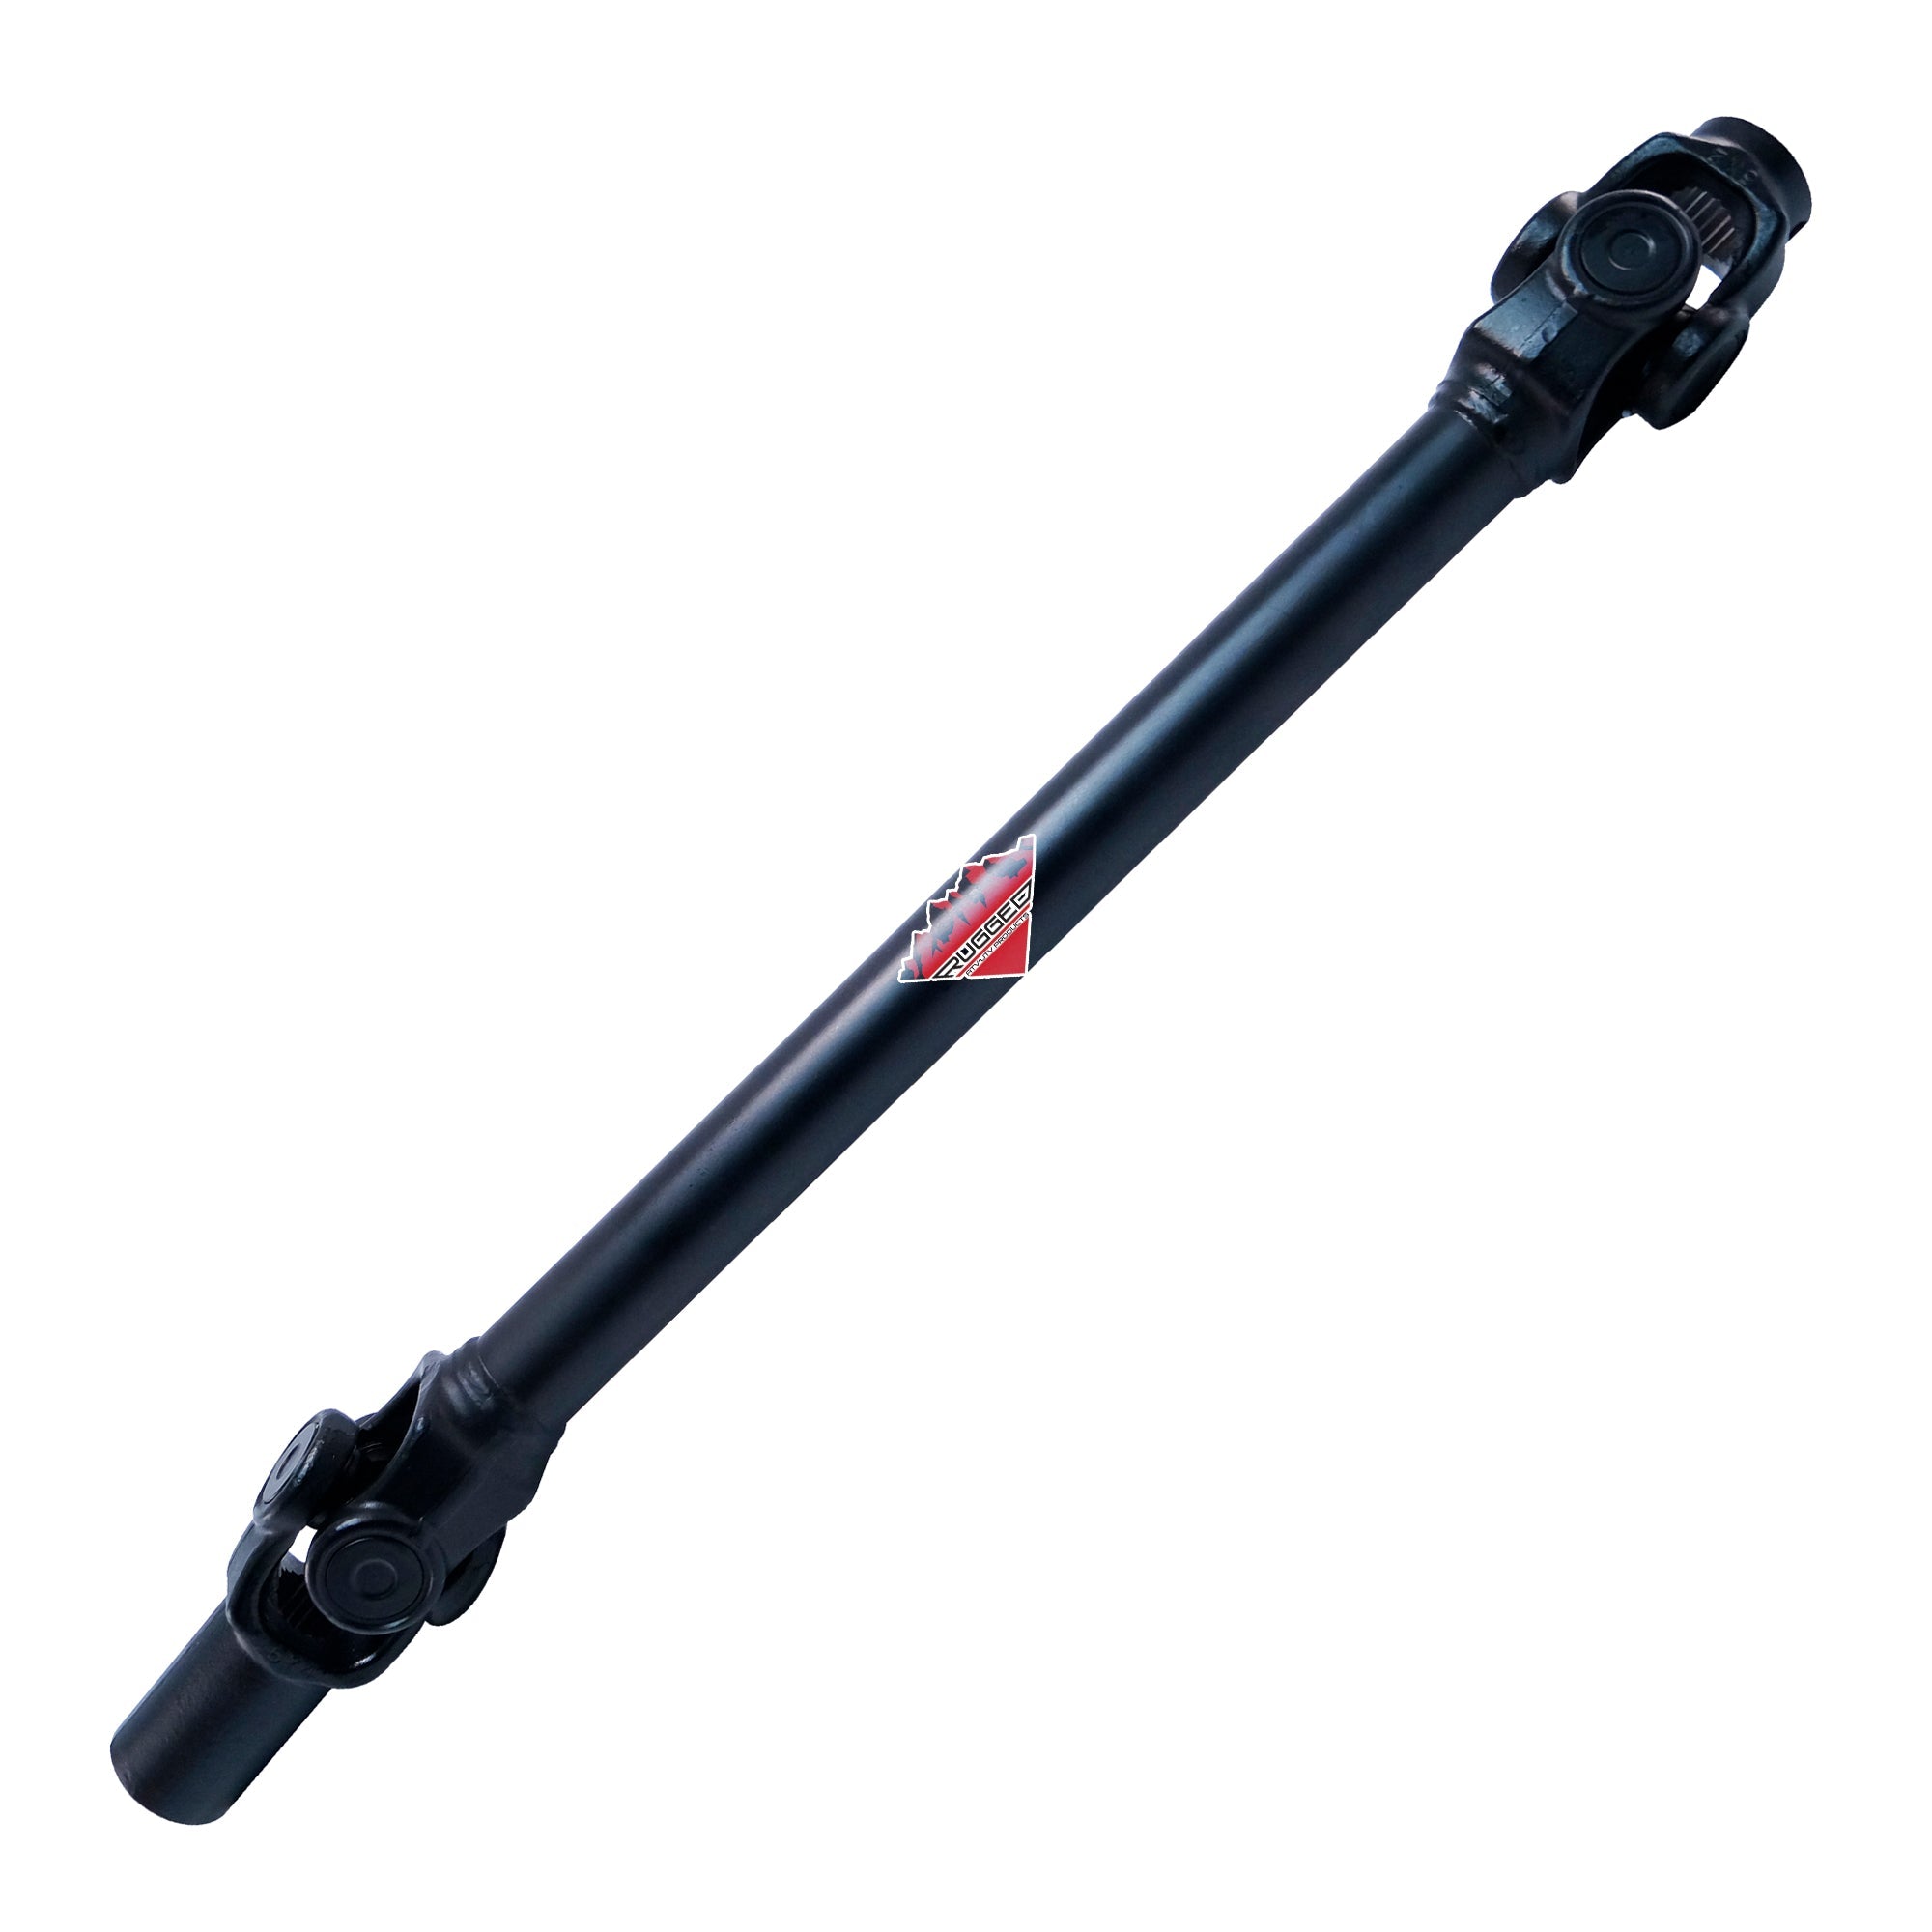 Heavy Duty Axle for Can-Am Outlander 800 — Demon Powersports